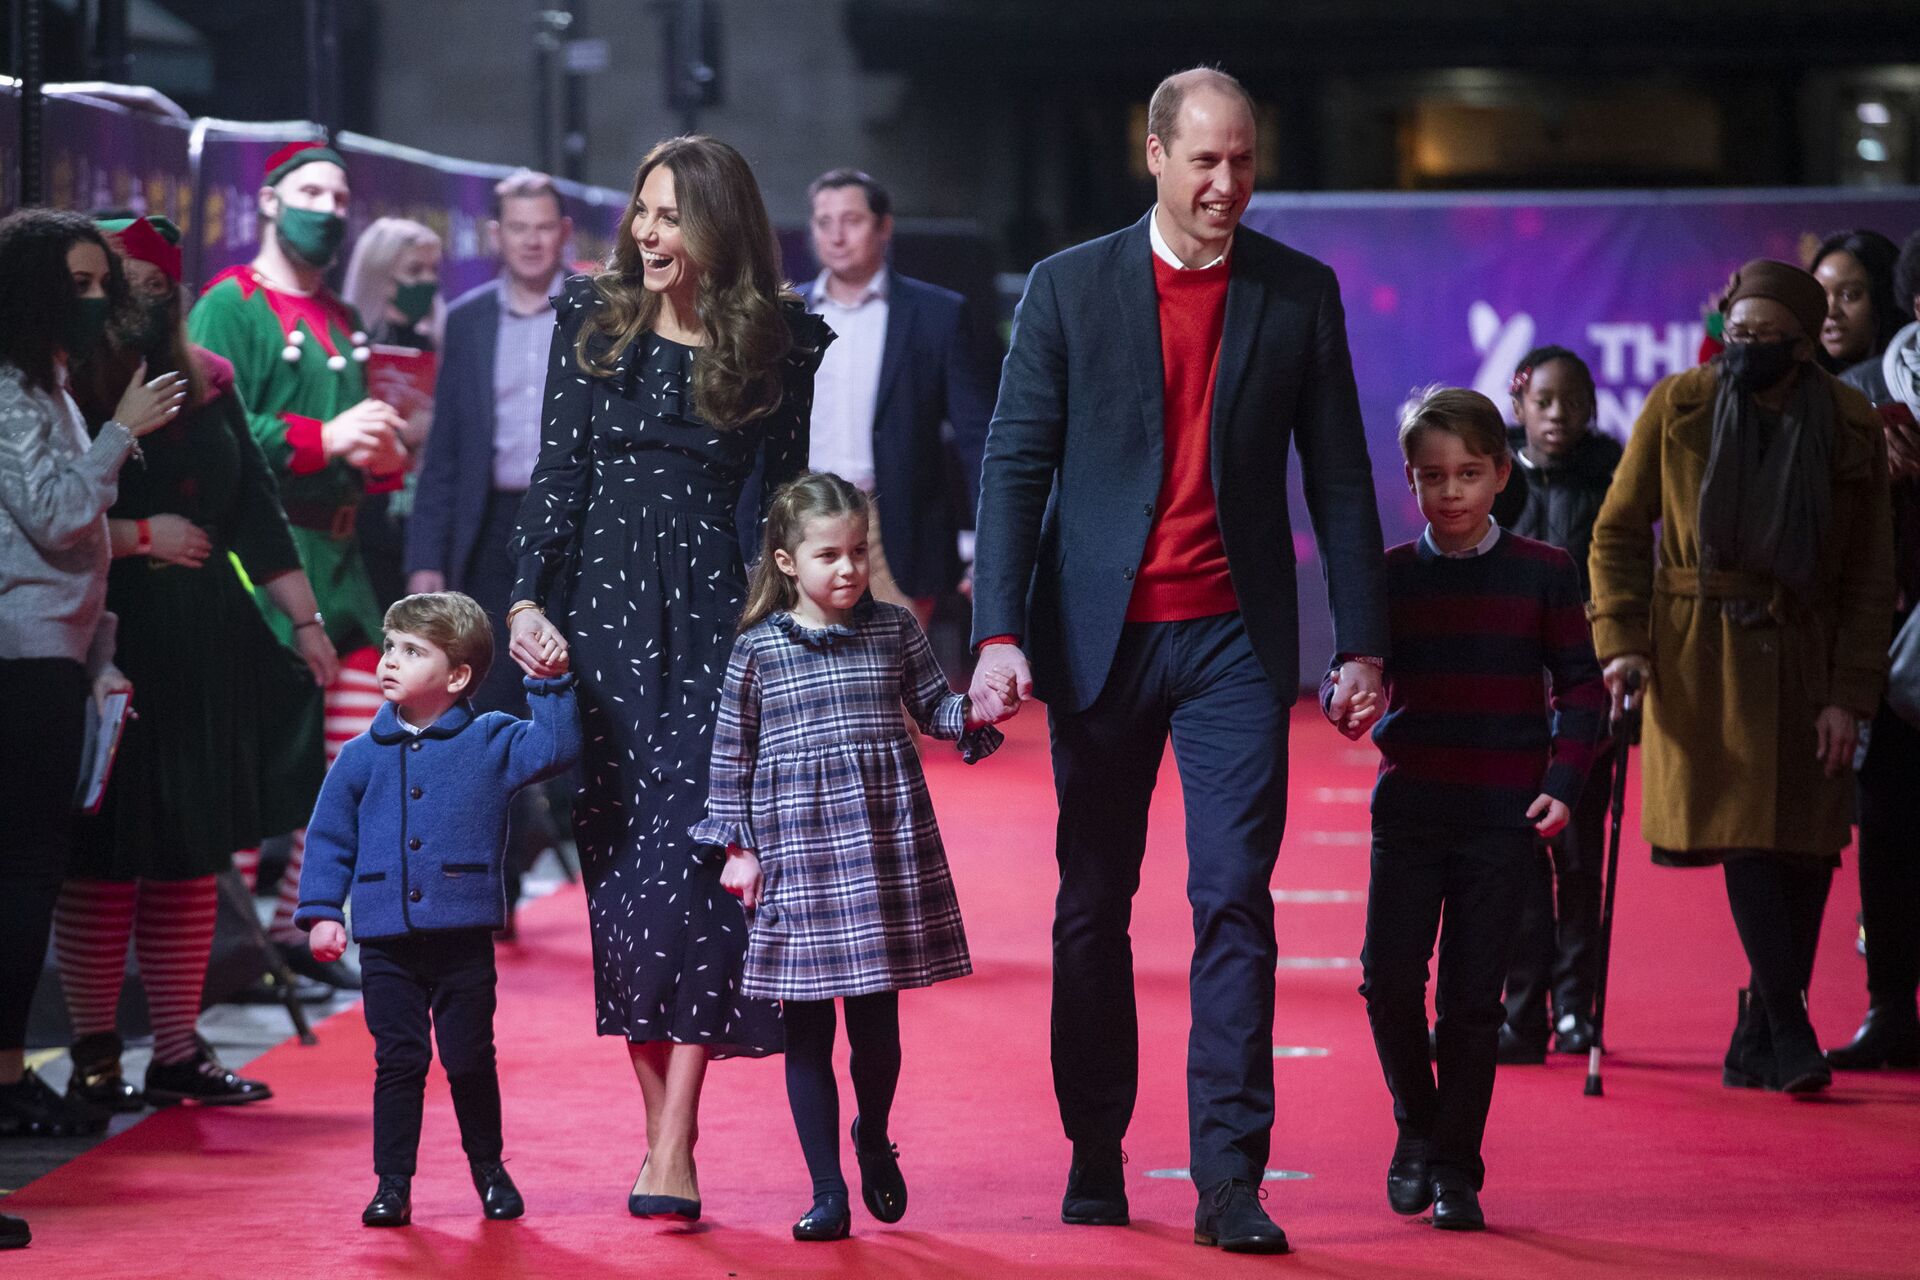 In this Friday Dec. 11, 2020 file photo, Britain's Prince William and Kate, The Duke and Duchess of Cambridge and their children, Prince Louis, left, Princess Charlotte and Prince George arrive for a special pantomime performance at London's Palladium Theatre. - Sputnik International, 1920, 05.12.2021